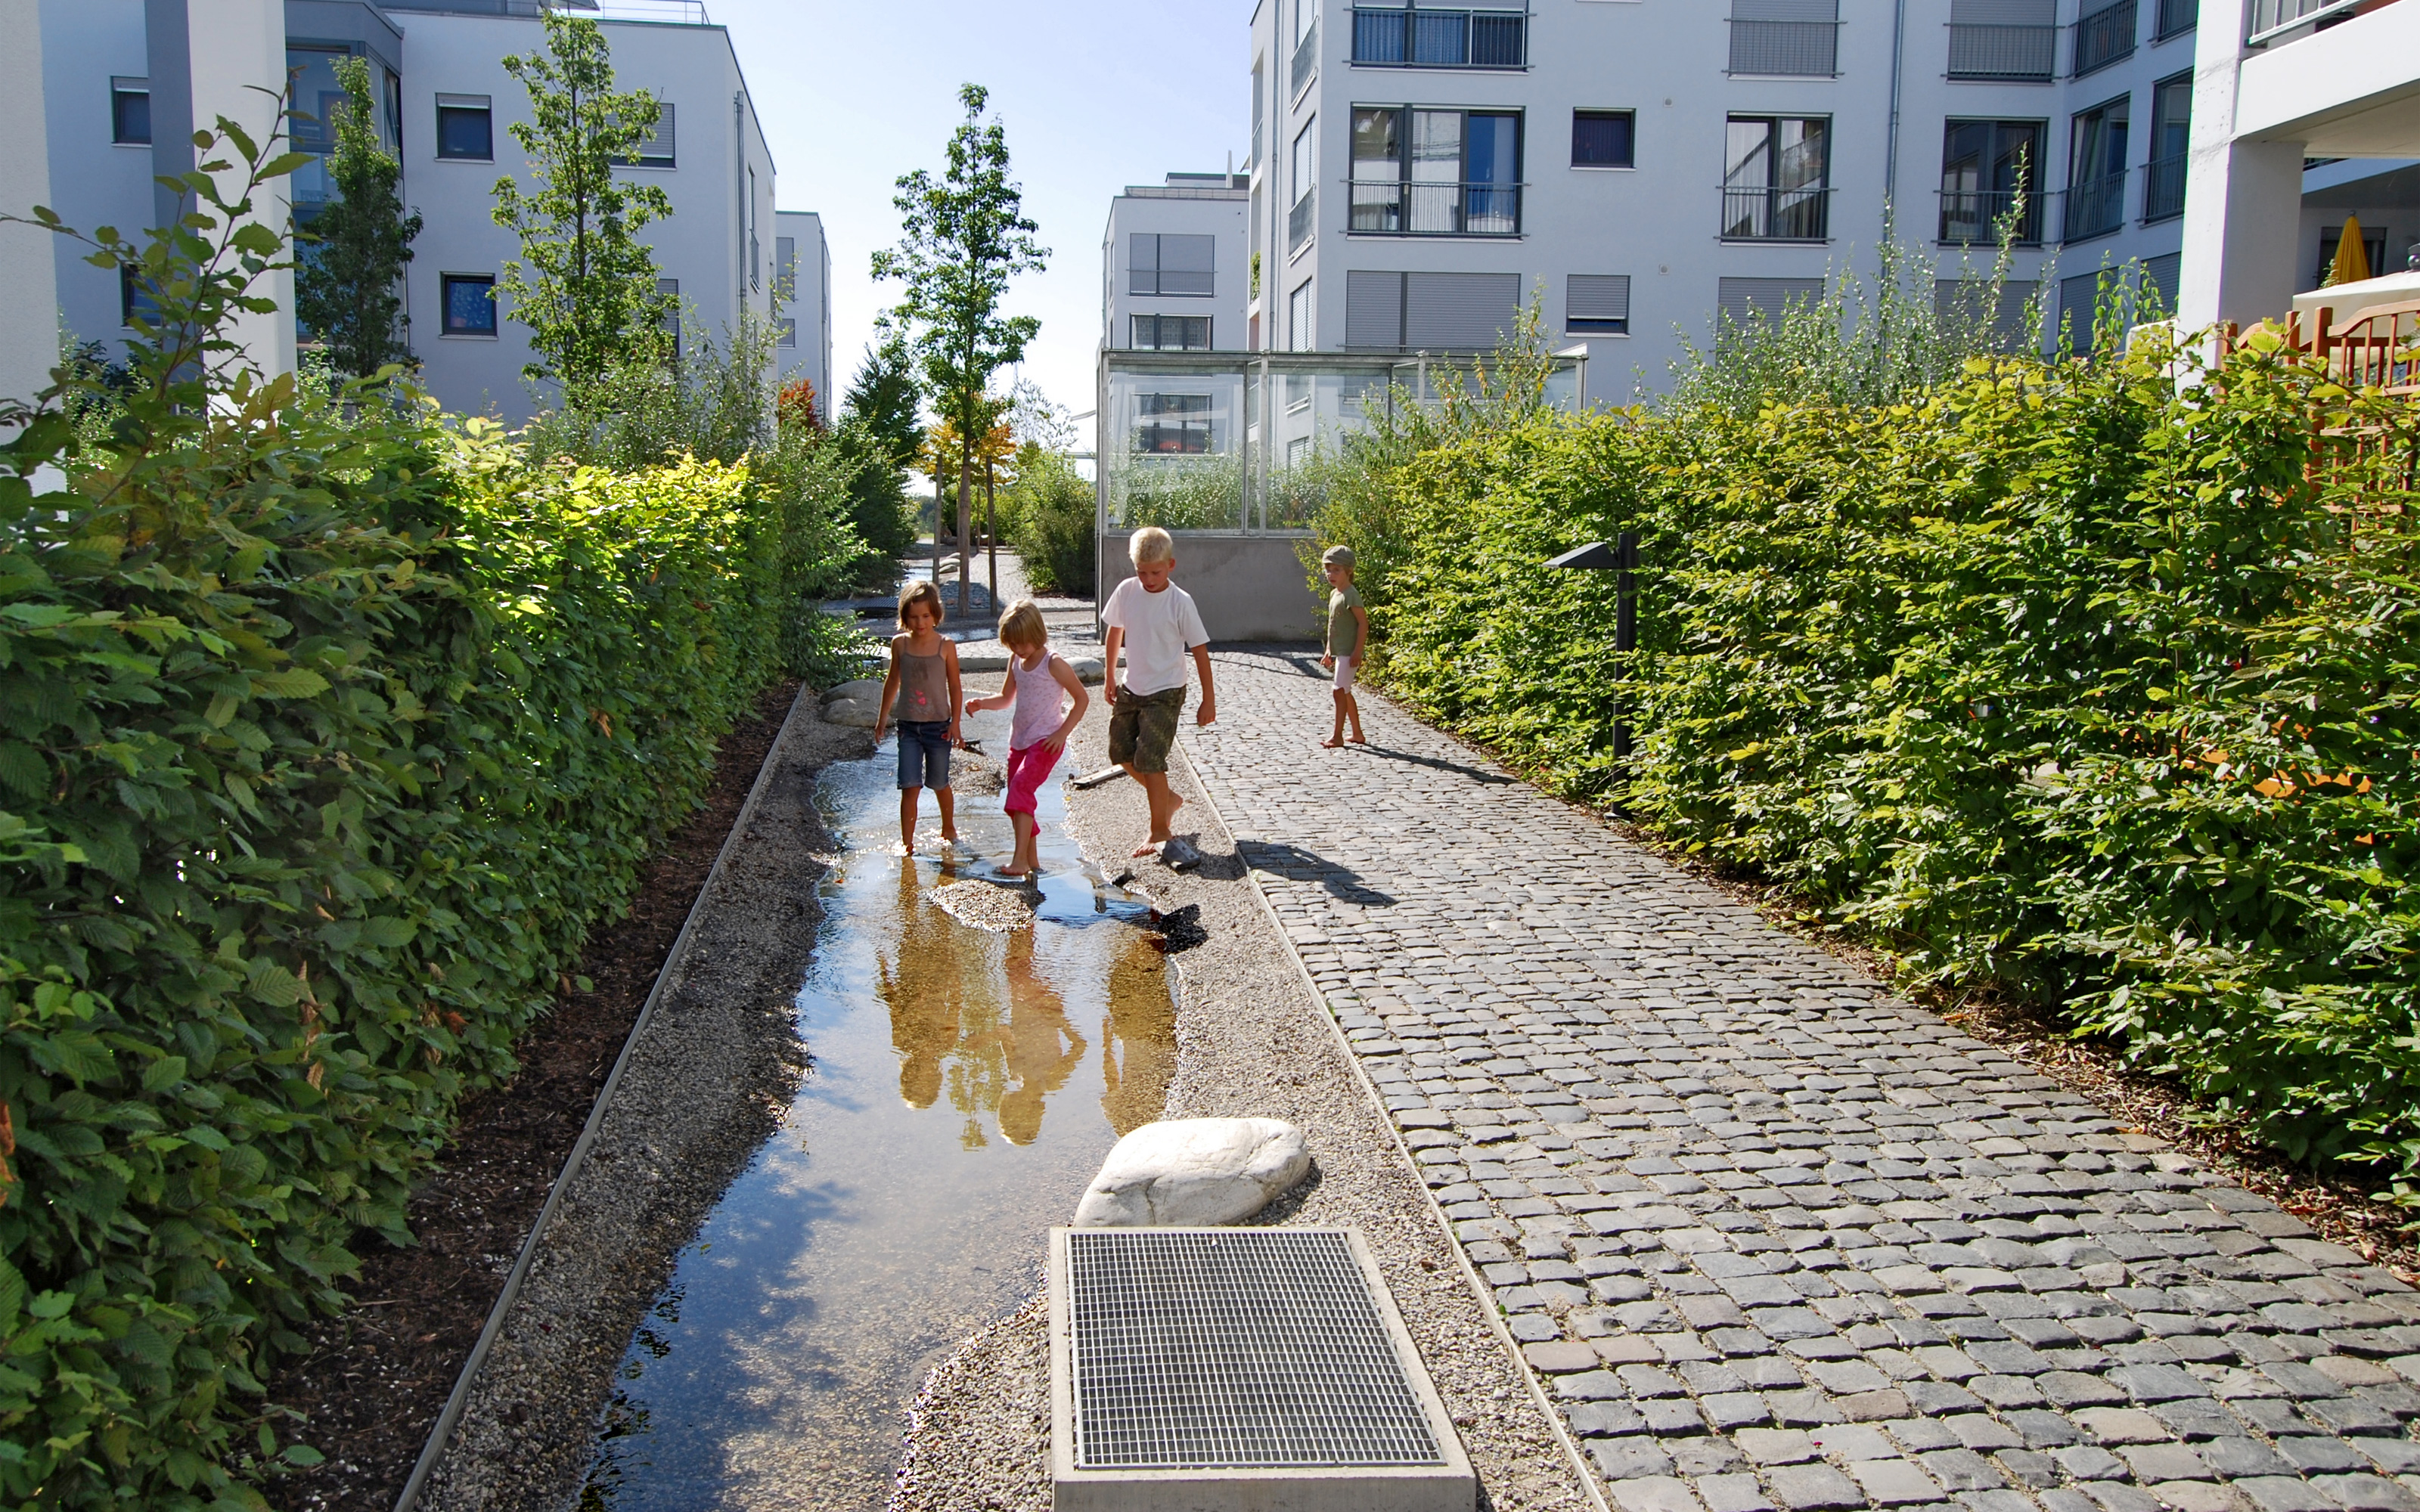 Children playing at an artificial creek within a green courtyard